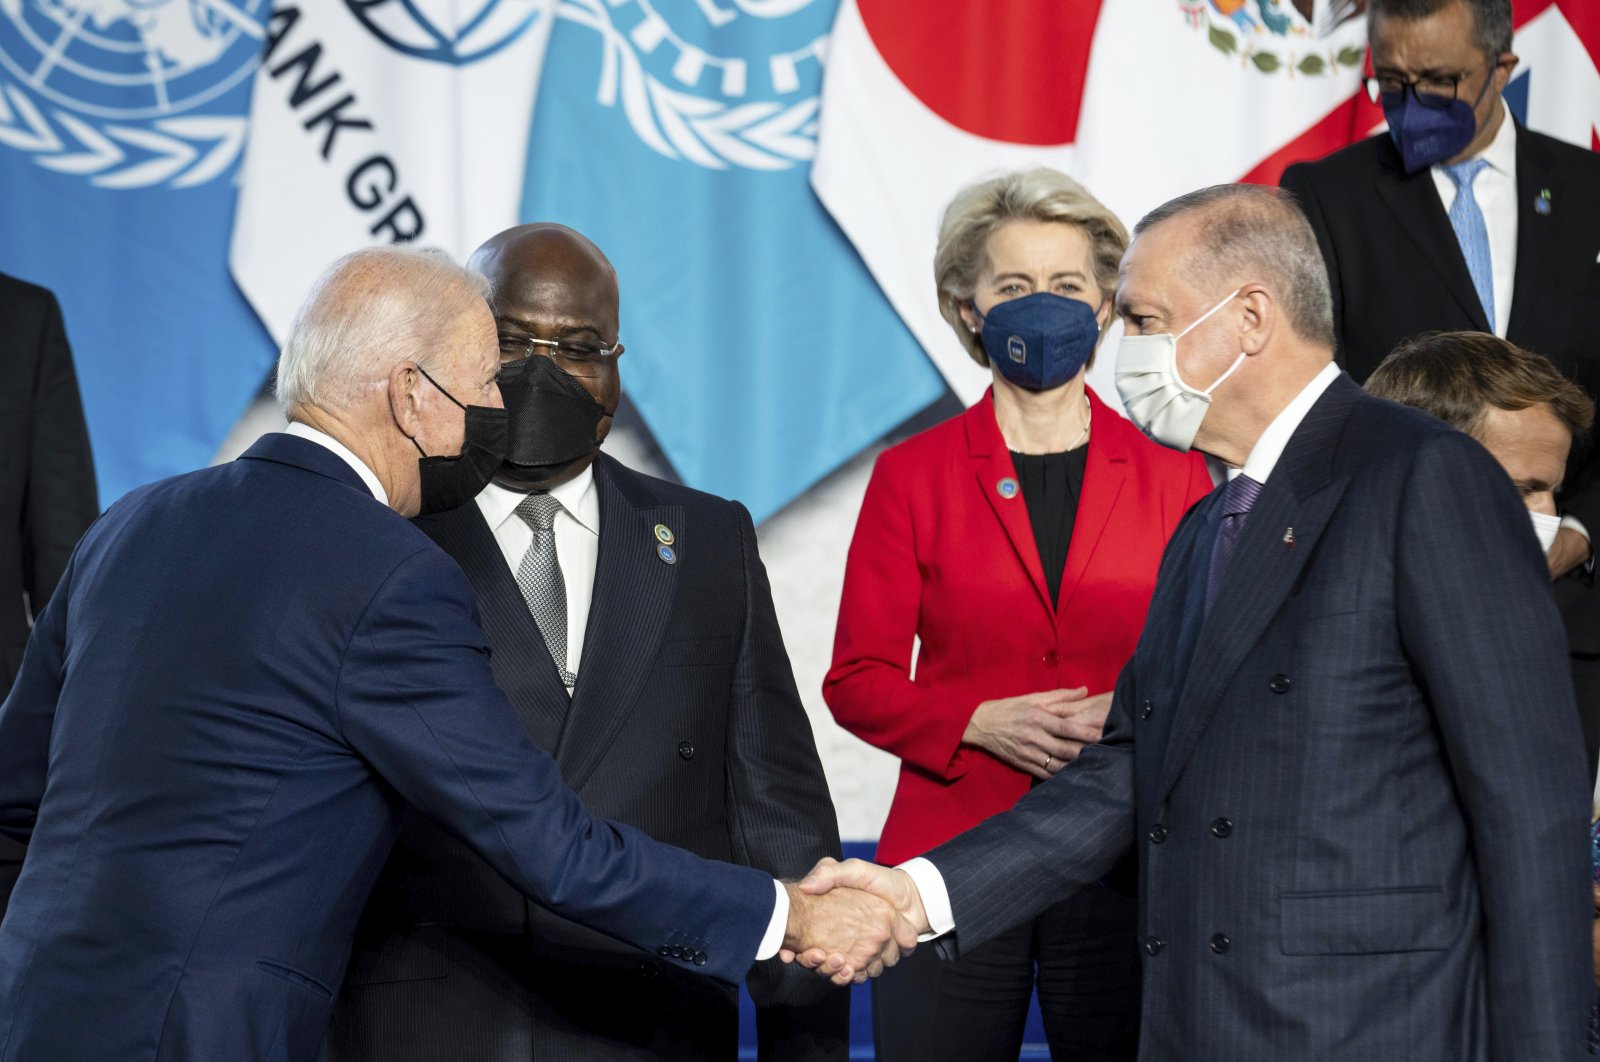 President Recep Tayyip Erdoğan (R) and U.S. President Joe Biden shake hands ahead of the opening session of the G-20 summit at La Nuvola conference center, in Rome, Italy, Oct. 30, 2021. (AP Photo)